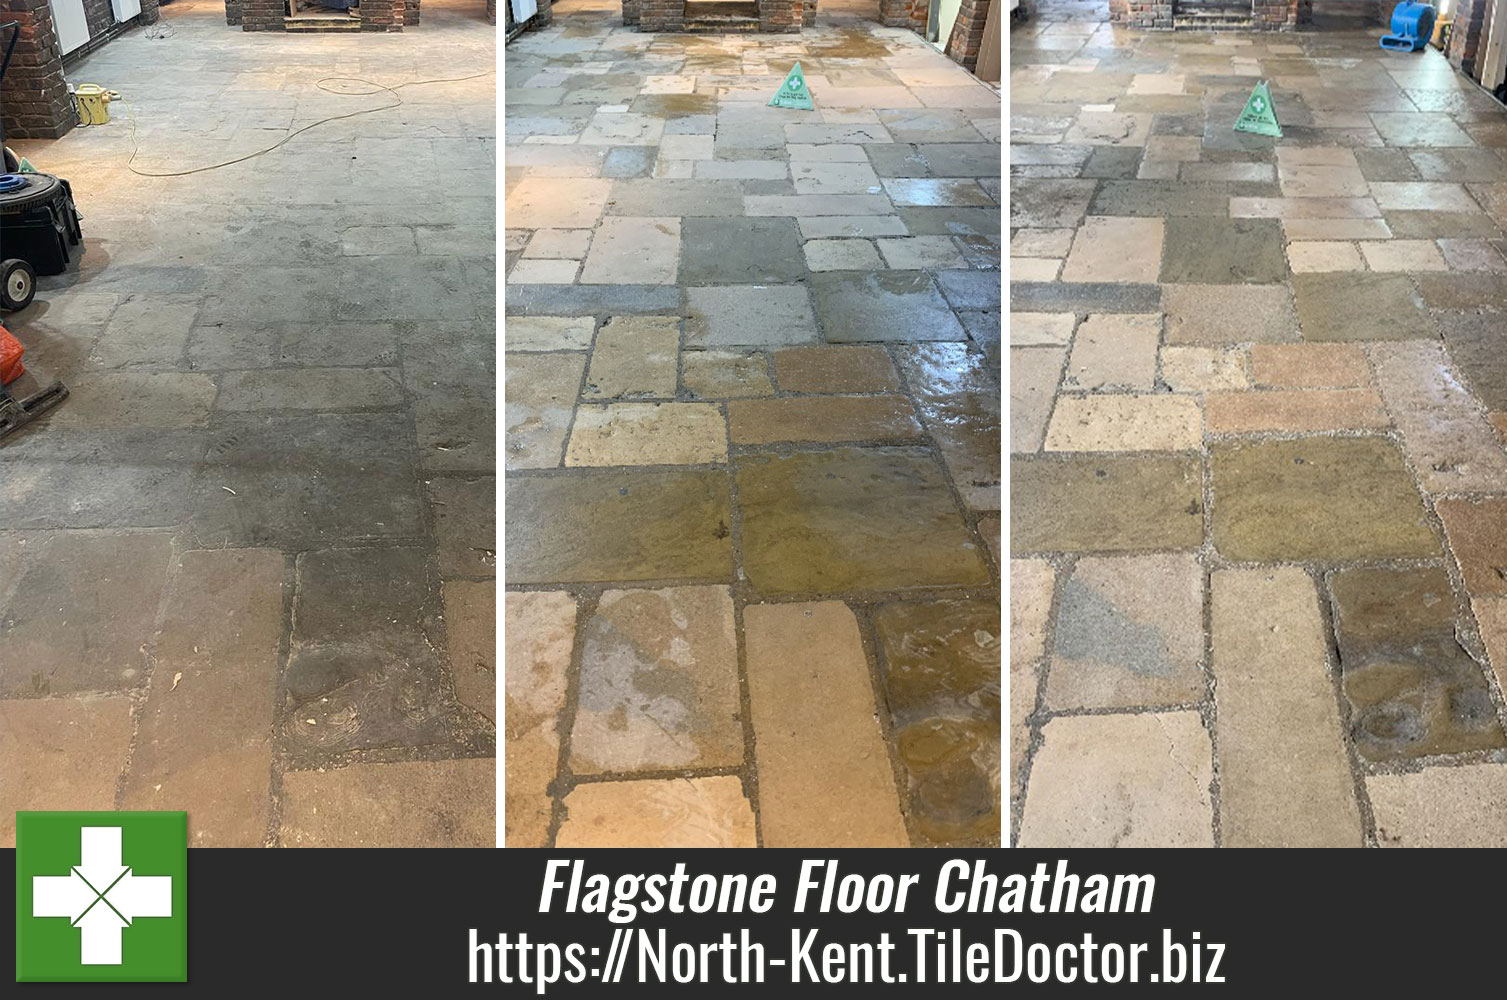 Using Burnishing Pads to Deep Clean Old Flagstone Flooring in Chatham Kent